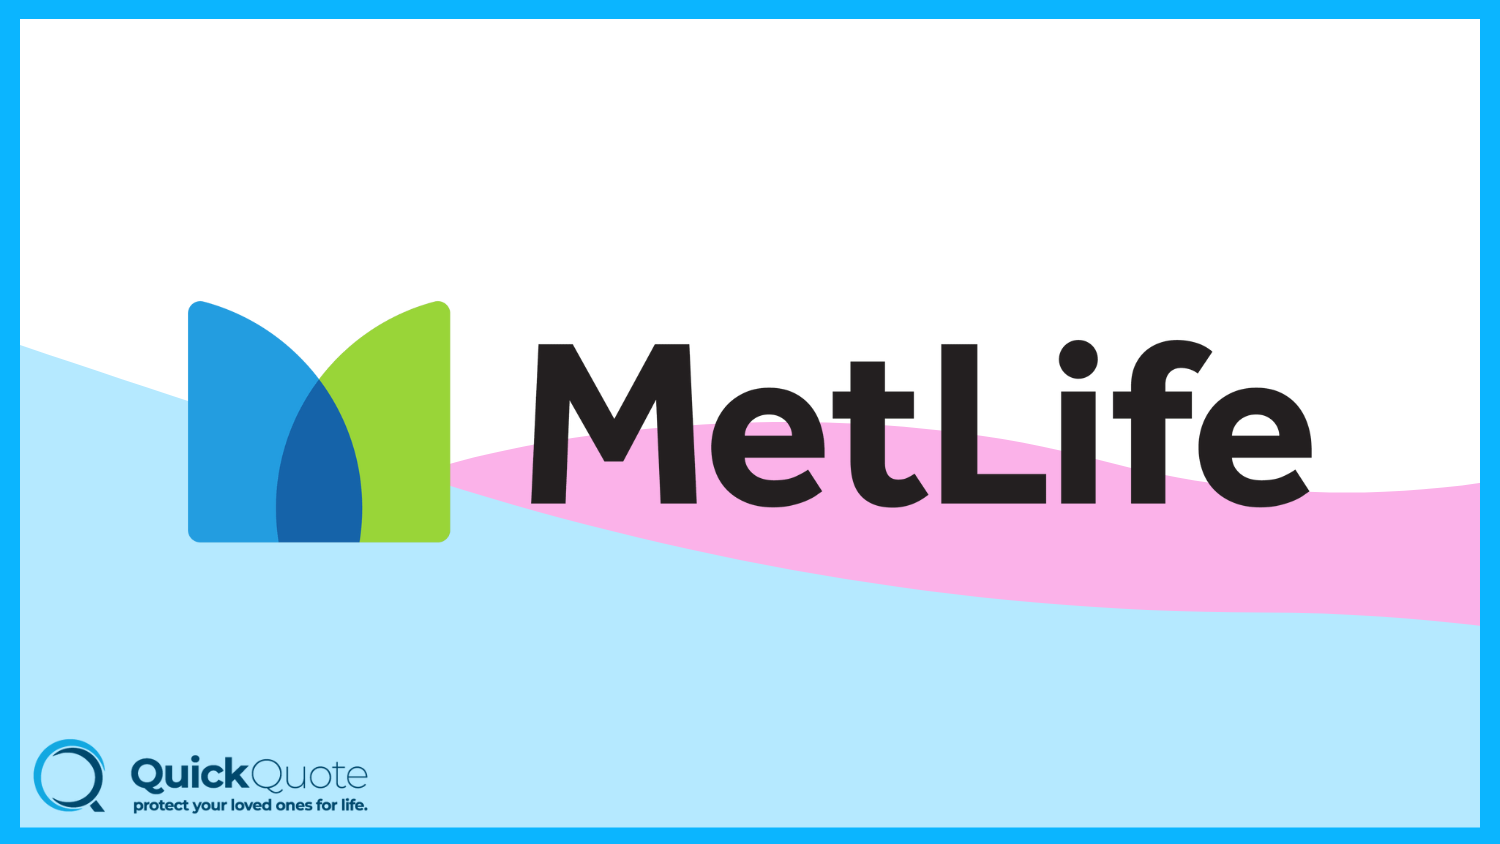 Cheap Life Insurance Without Medical Exams: MetLife